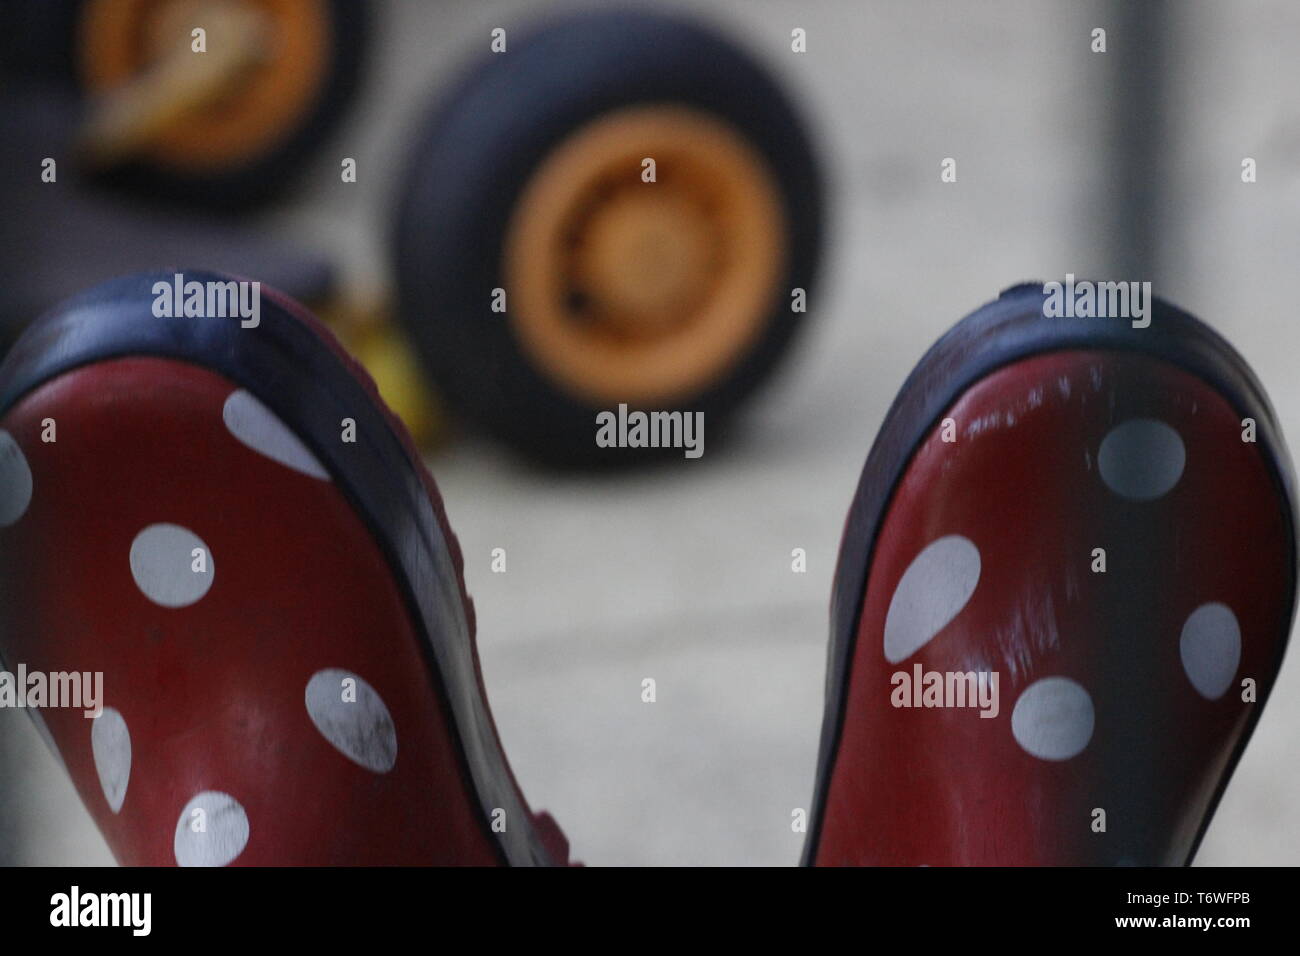 colour image of a close up view of a pair of red childrens boots with white dots. in the background is a yellow tyre from a toy. Stock Photo